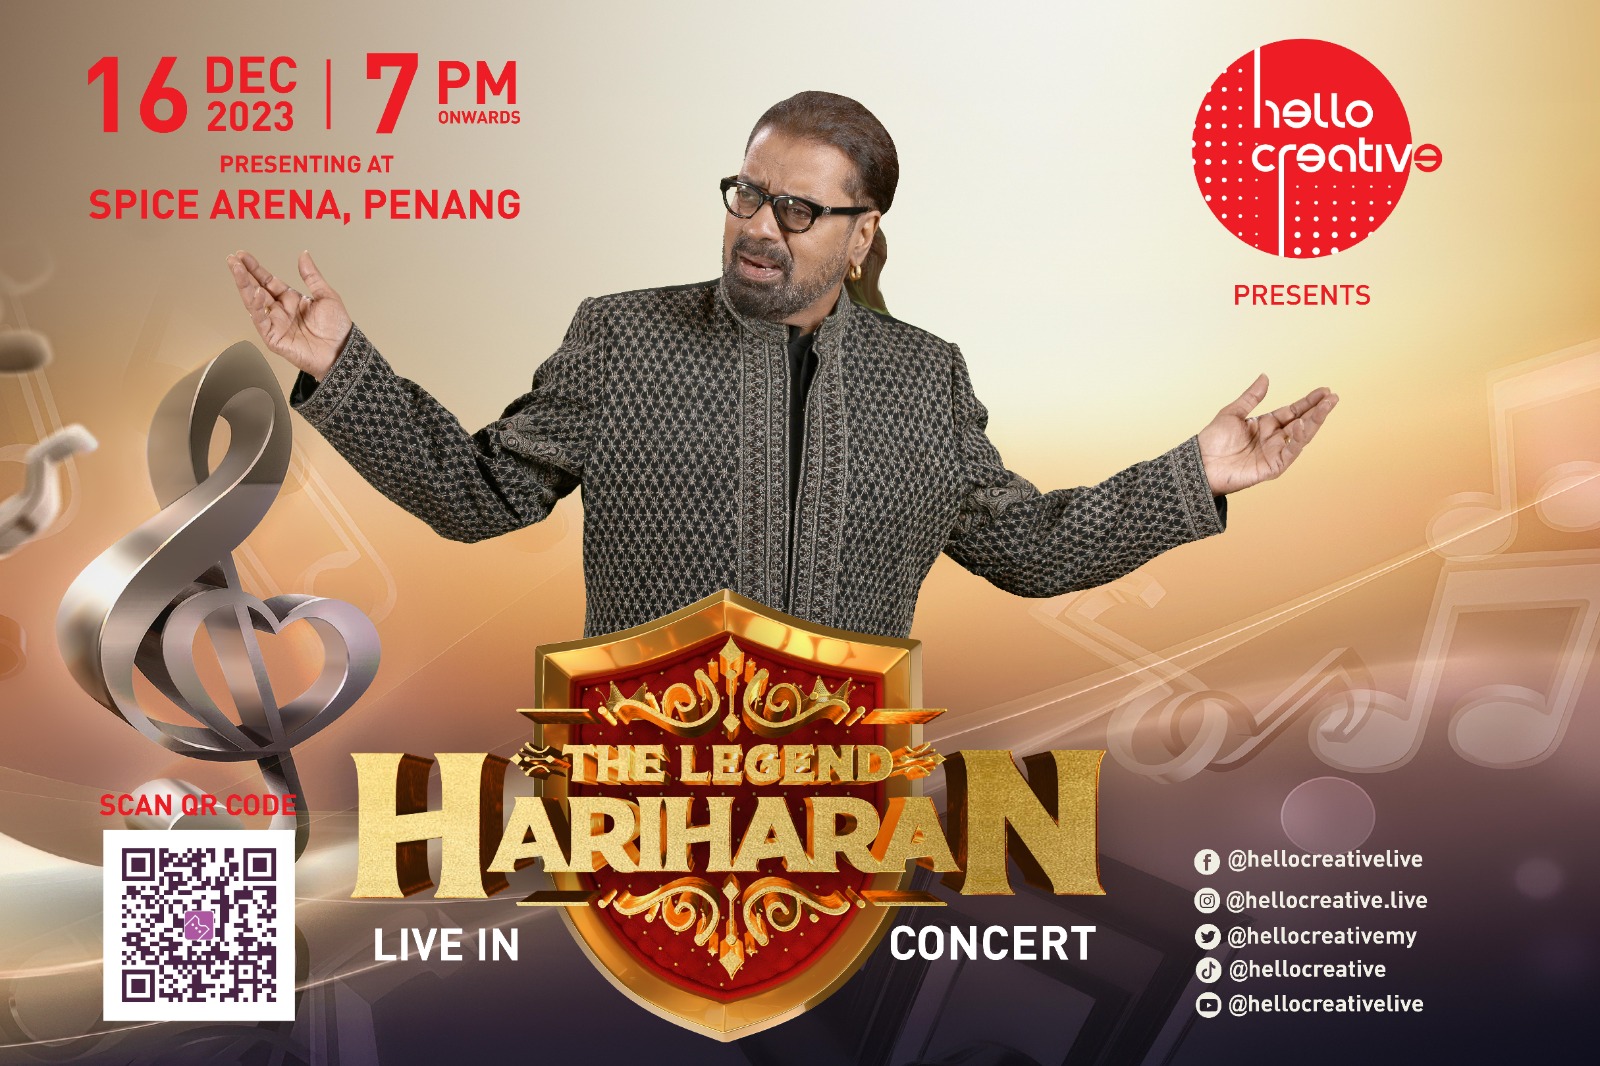 Hariharan set to mesmerise Penang in first-ever live concert